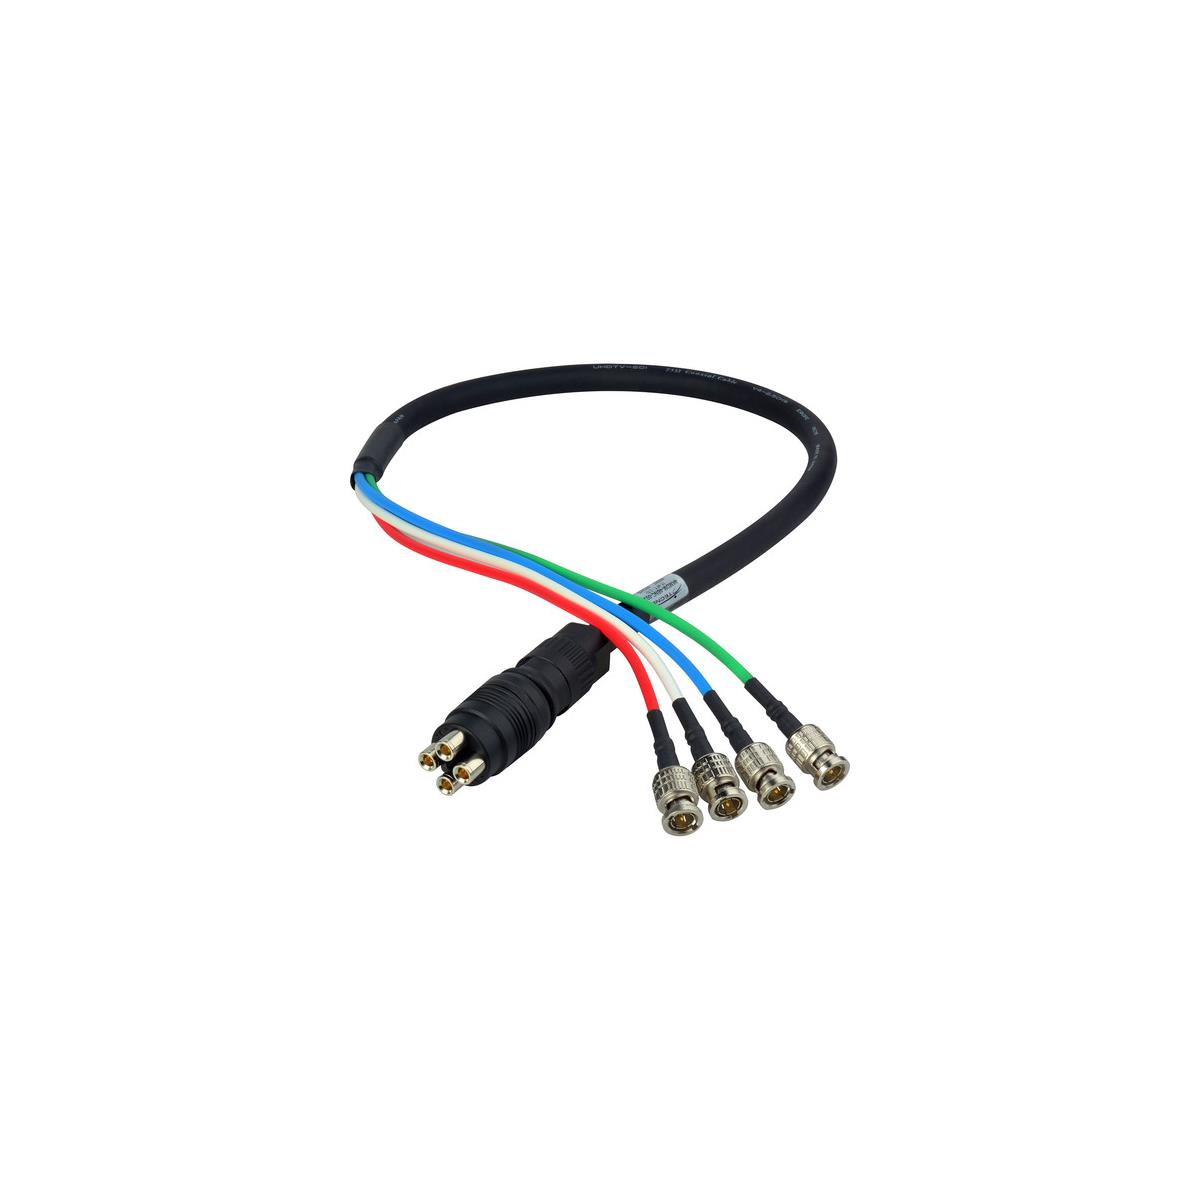 Laird 25' 4K UHD 3G HD-SDI 4-Channel DIN Male to BNC Camera Breakout Cable <b> 4-3G HD-SDI Signal Channel Quick Connect System for 4K/UHD Video Formats </b>One step, quick-connect Laird coax Canare cable assemblies connect 4 channels of 3G HD-SDI signals for 4K/UHD video formats. The Laird cables are assembled with Canare 4 channel, V4-2.5CHW flexible coaxial cable, allowing a break out to 4 Canare BNC or 4 DIN connectors. The Canare male connector, MDM-V4C25HW is designed to mate with the MDF-V4JRU panel mount receptacle which features a 4 DIN pass-through on the back side to increase your connectivity but not your rack space. Laird 4K UHD Canare camera cables assemblies make quick work of keeping everything in line and organized. Available in a variety of lengths. Use with the Canare MDF-V4JRU 4K DIN 1.0/2.3 4-channel chassis mount connector.• Quick connect and disconnect• Multiple 3G-SDI signals to 4K/UHD formats• Canare cable with solid and lightweight nylon resin body• Push-pull locking Canare coax connectors with protective rubber boots• High performance Canare BCP-B25HW BNC or 4 DCP-C25HD DIN connectors• Made in the USA in a Canare trained fiber shop• Canare V4-2.5CHW 4-Channel 4K 75Ohms Coaxial Cable• 4 DIN 1.0/2.3 connectors• MDF-V4JRU accepts MDM-V4C25HW and also DIN 1.0/2.3 plugs<b> Applications </b>• High density 3G-SDI• applications• Mobile trucks• Fly packs• Studios• 4K transmission• Consolidate HD-SDI lines